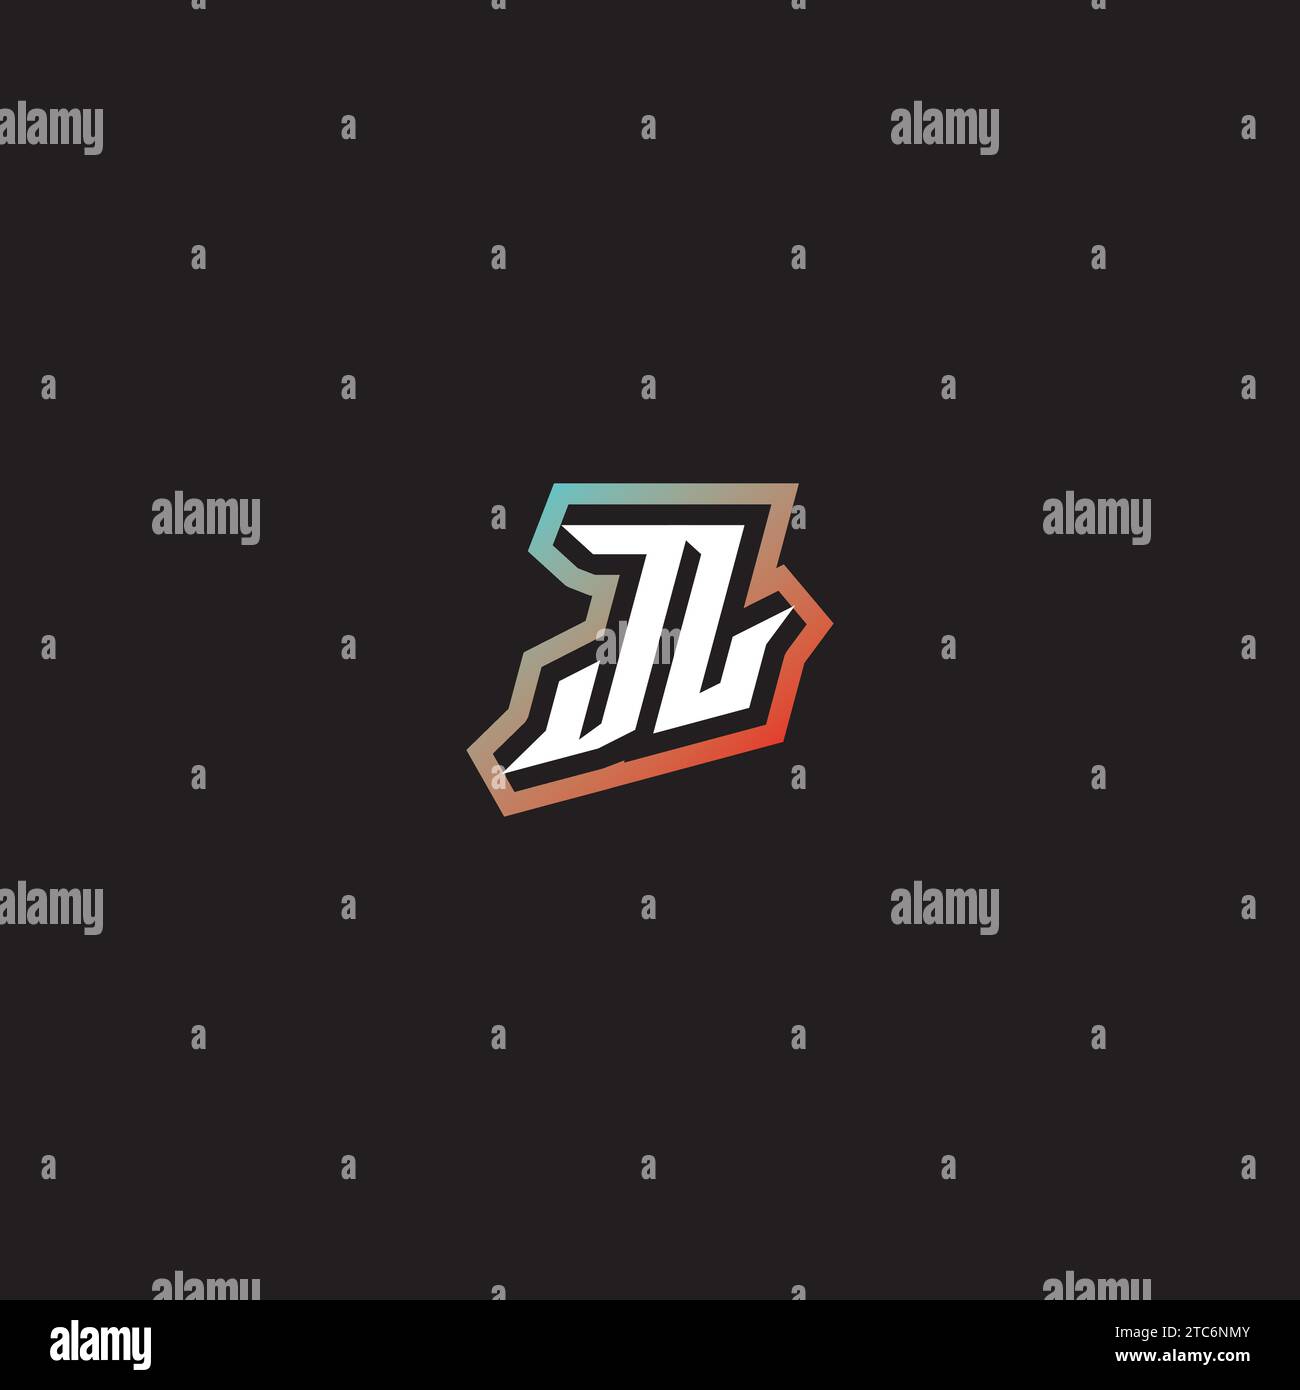 JL letter combination cool logo esport initial and cool color gradattion ideas Stock Vector